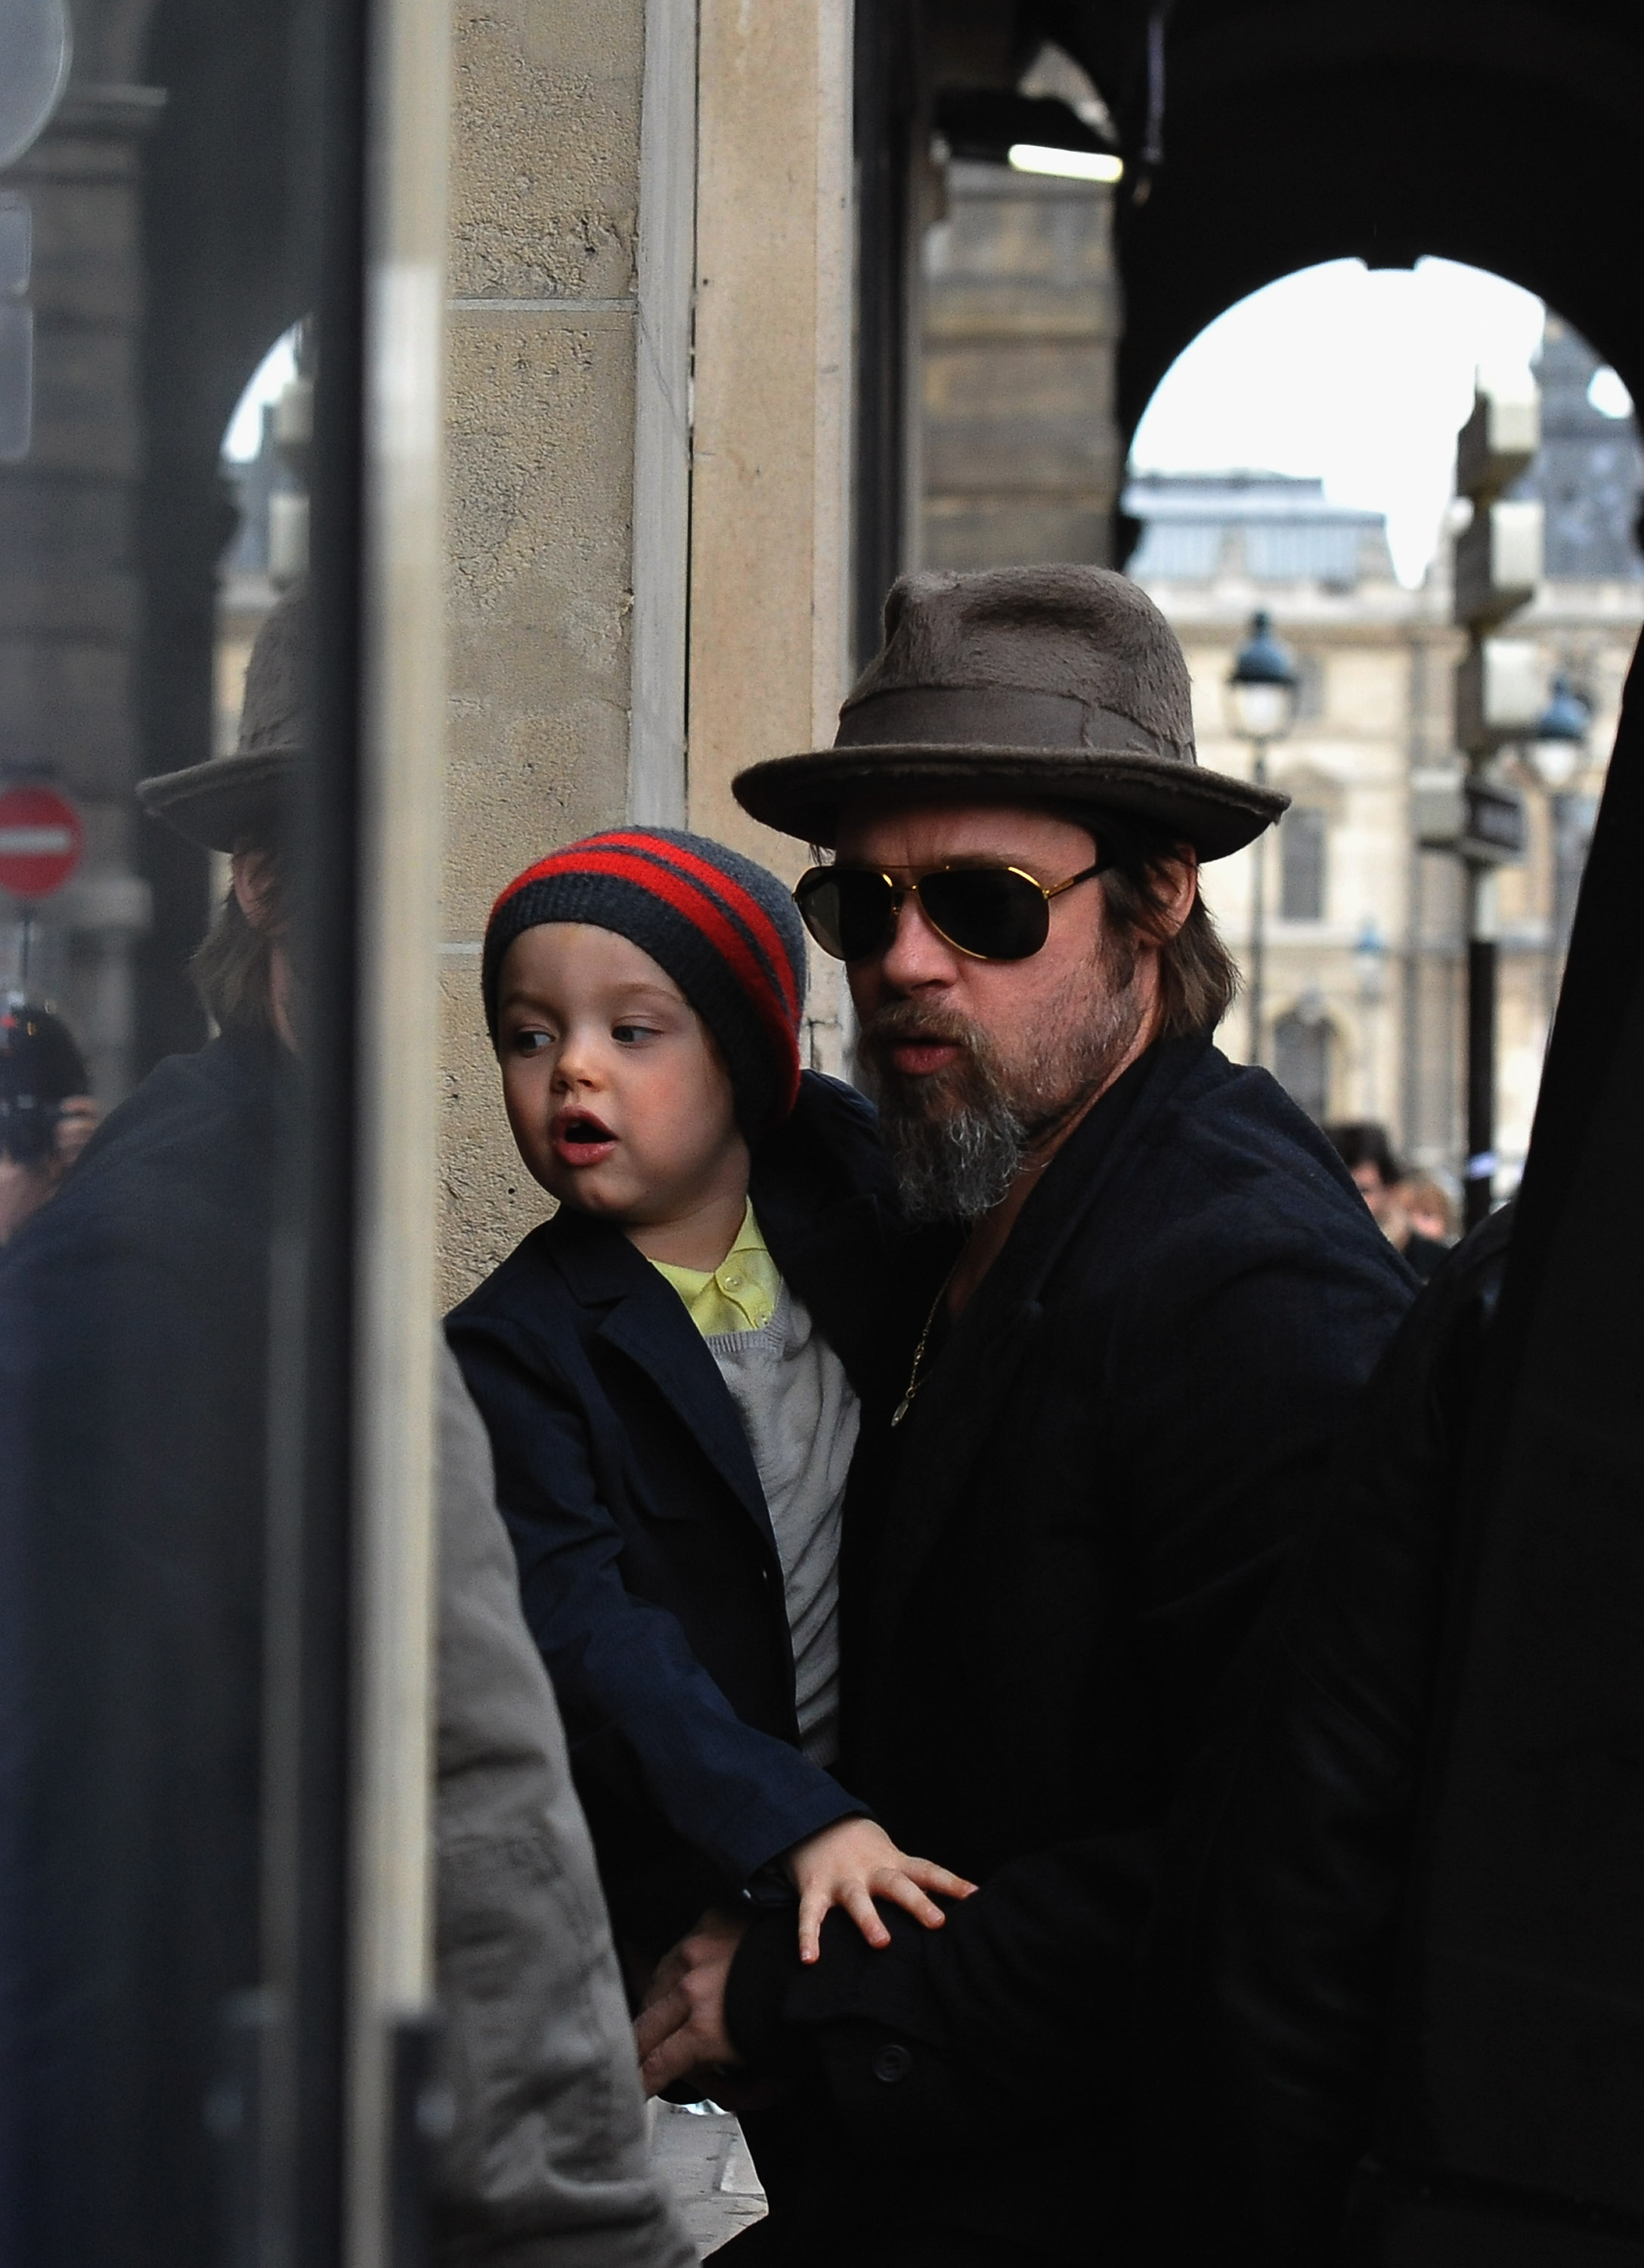 Brad Pitt and Shiloh Jolie-Pitt go shopping at Bonpoint shop in Paris, France, on February 23, 2010. | Source: Getty Images